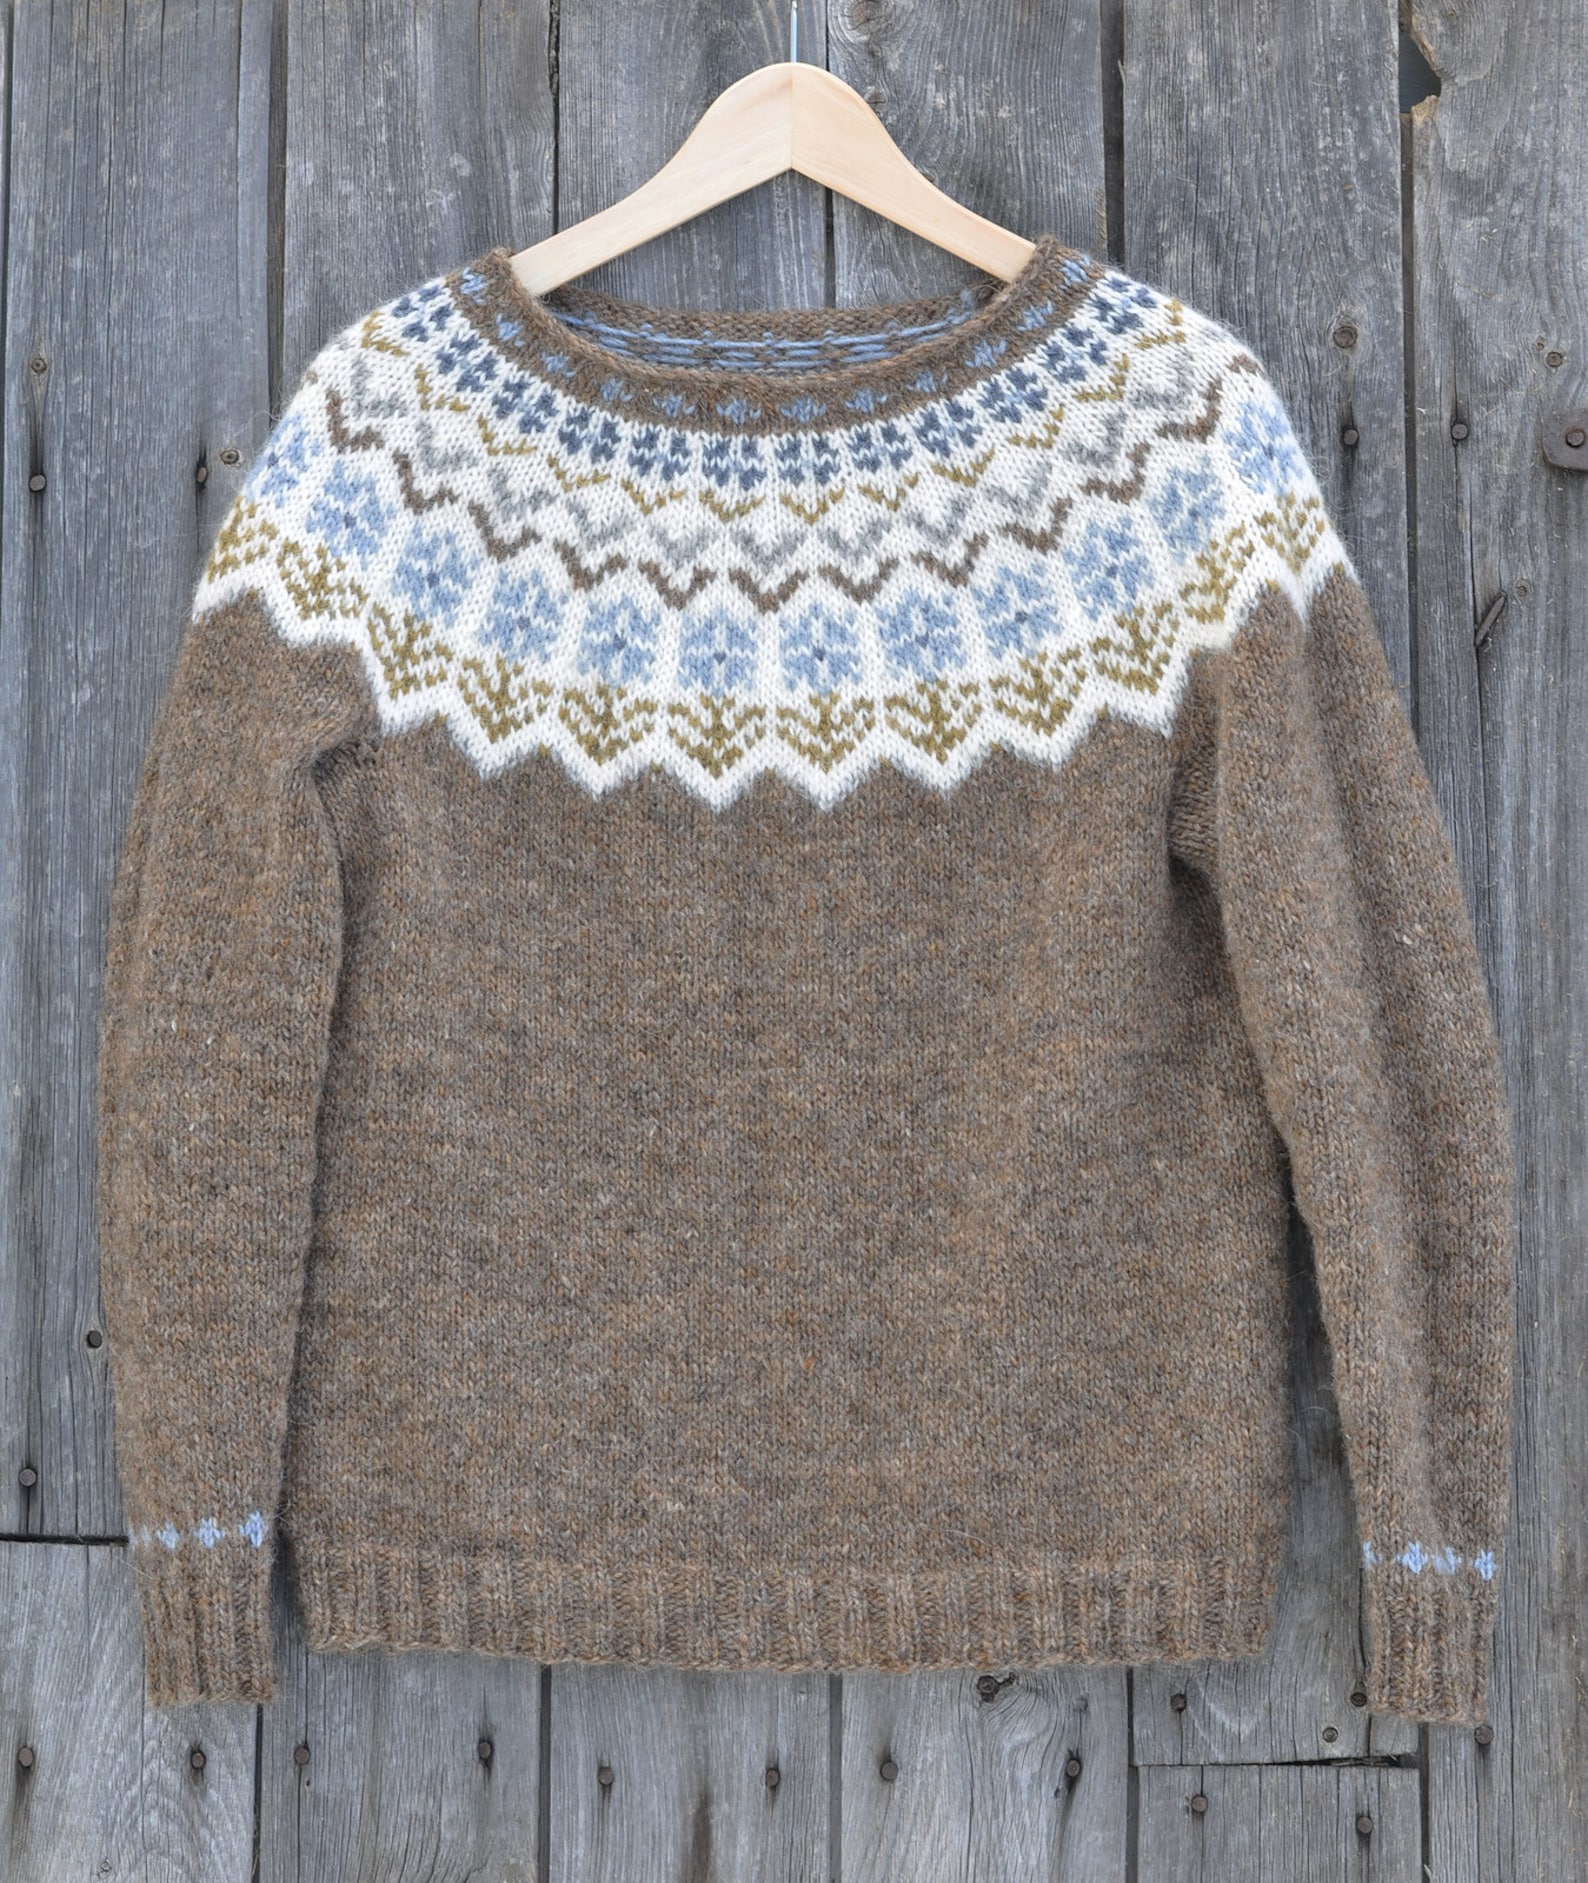 Brown Lopapeysa or Lopi Sweater With Floral Motifs - Etsy